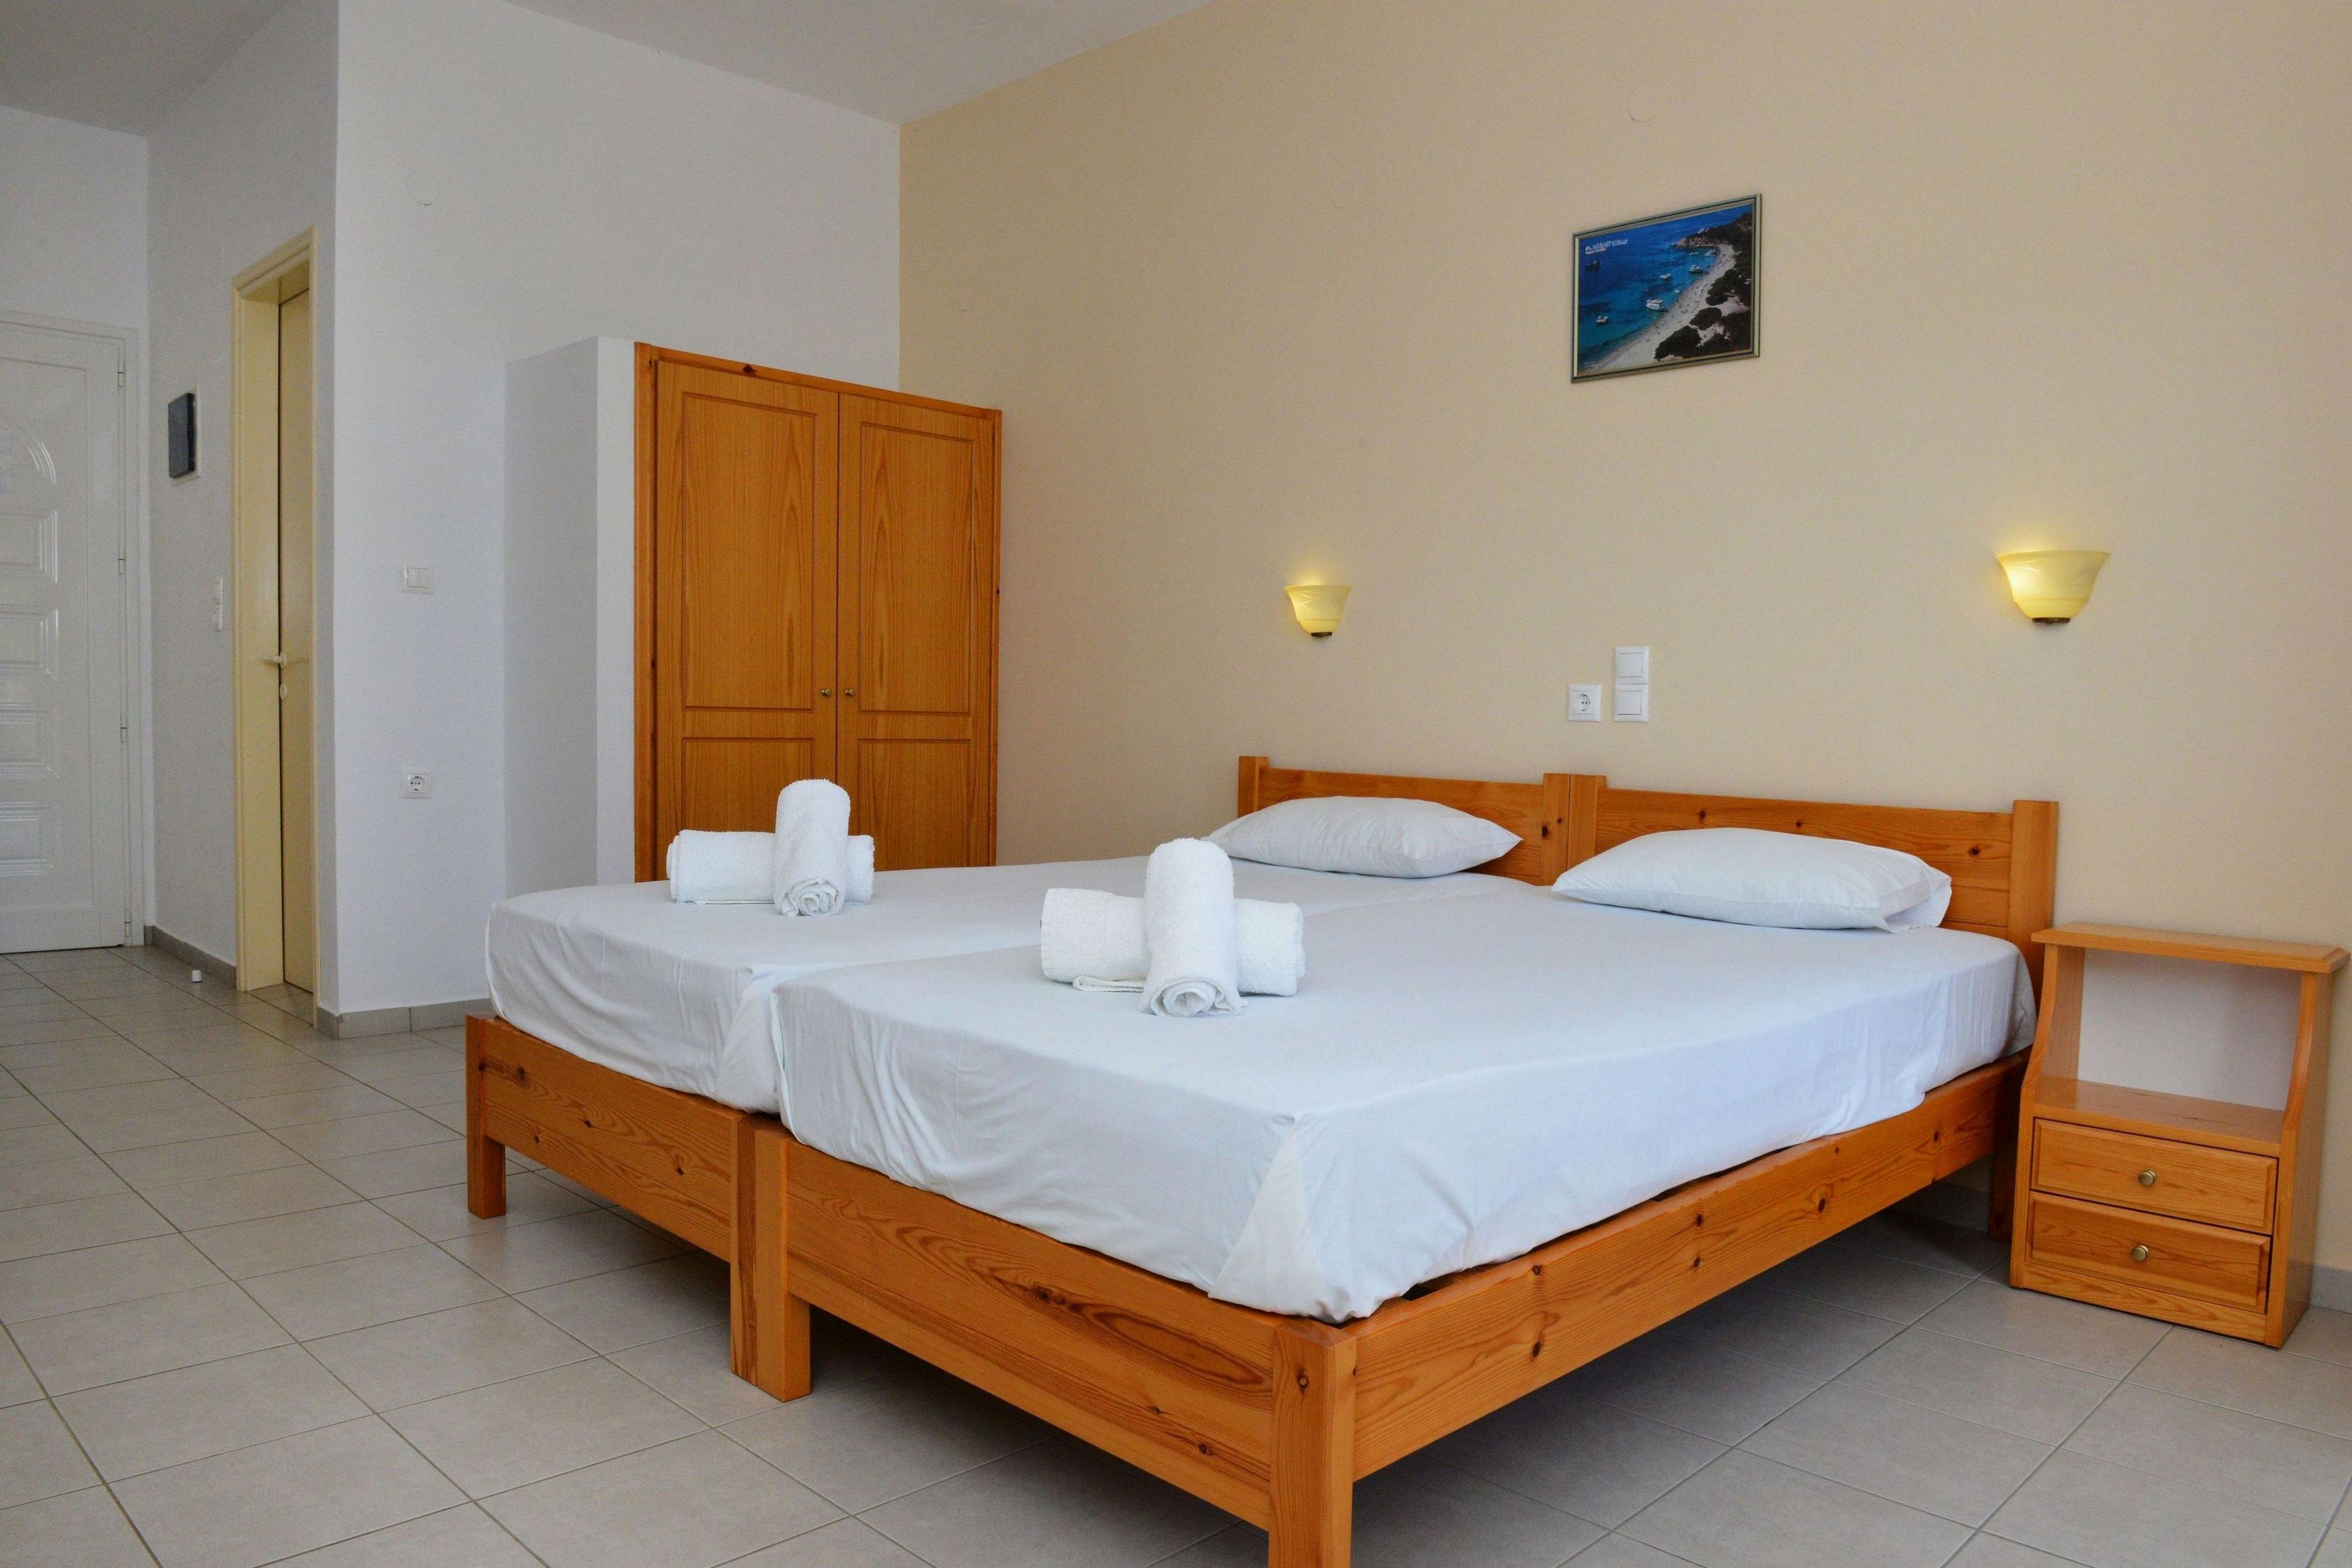 2 TWIN BEDS OR 1 DOUBLE BED, AIR-CONDITIONING, BALCONY, EQUIPPED TERRACE, BATHROOM WITH SHOWER, TOILET, HAIRDRYER-ON REQUEST, MIRROR, REFRIGERATOR, FLAT SCREEN TV, DAILY HOUSEKEEPING AND KETTLE ON REQUEST.